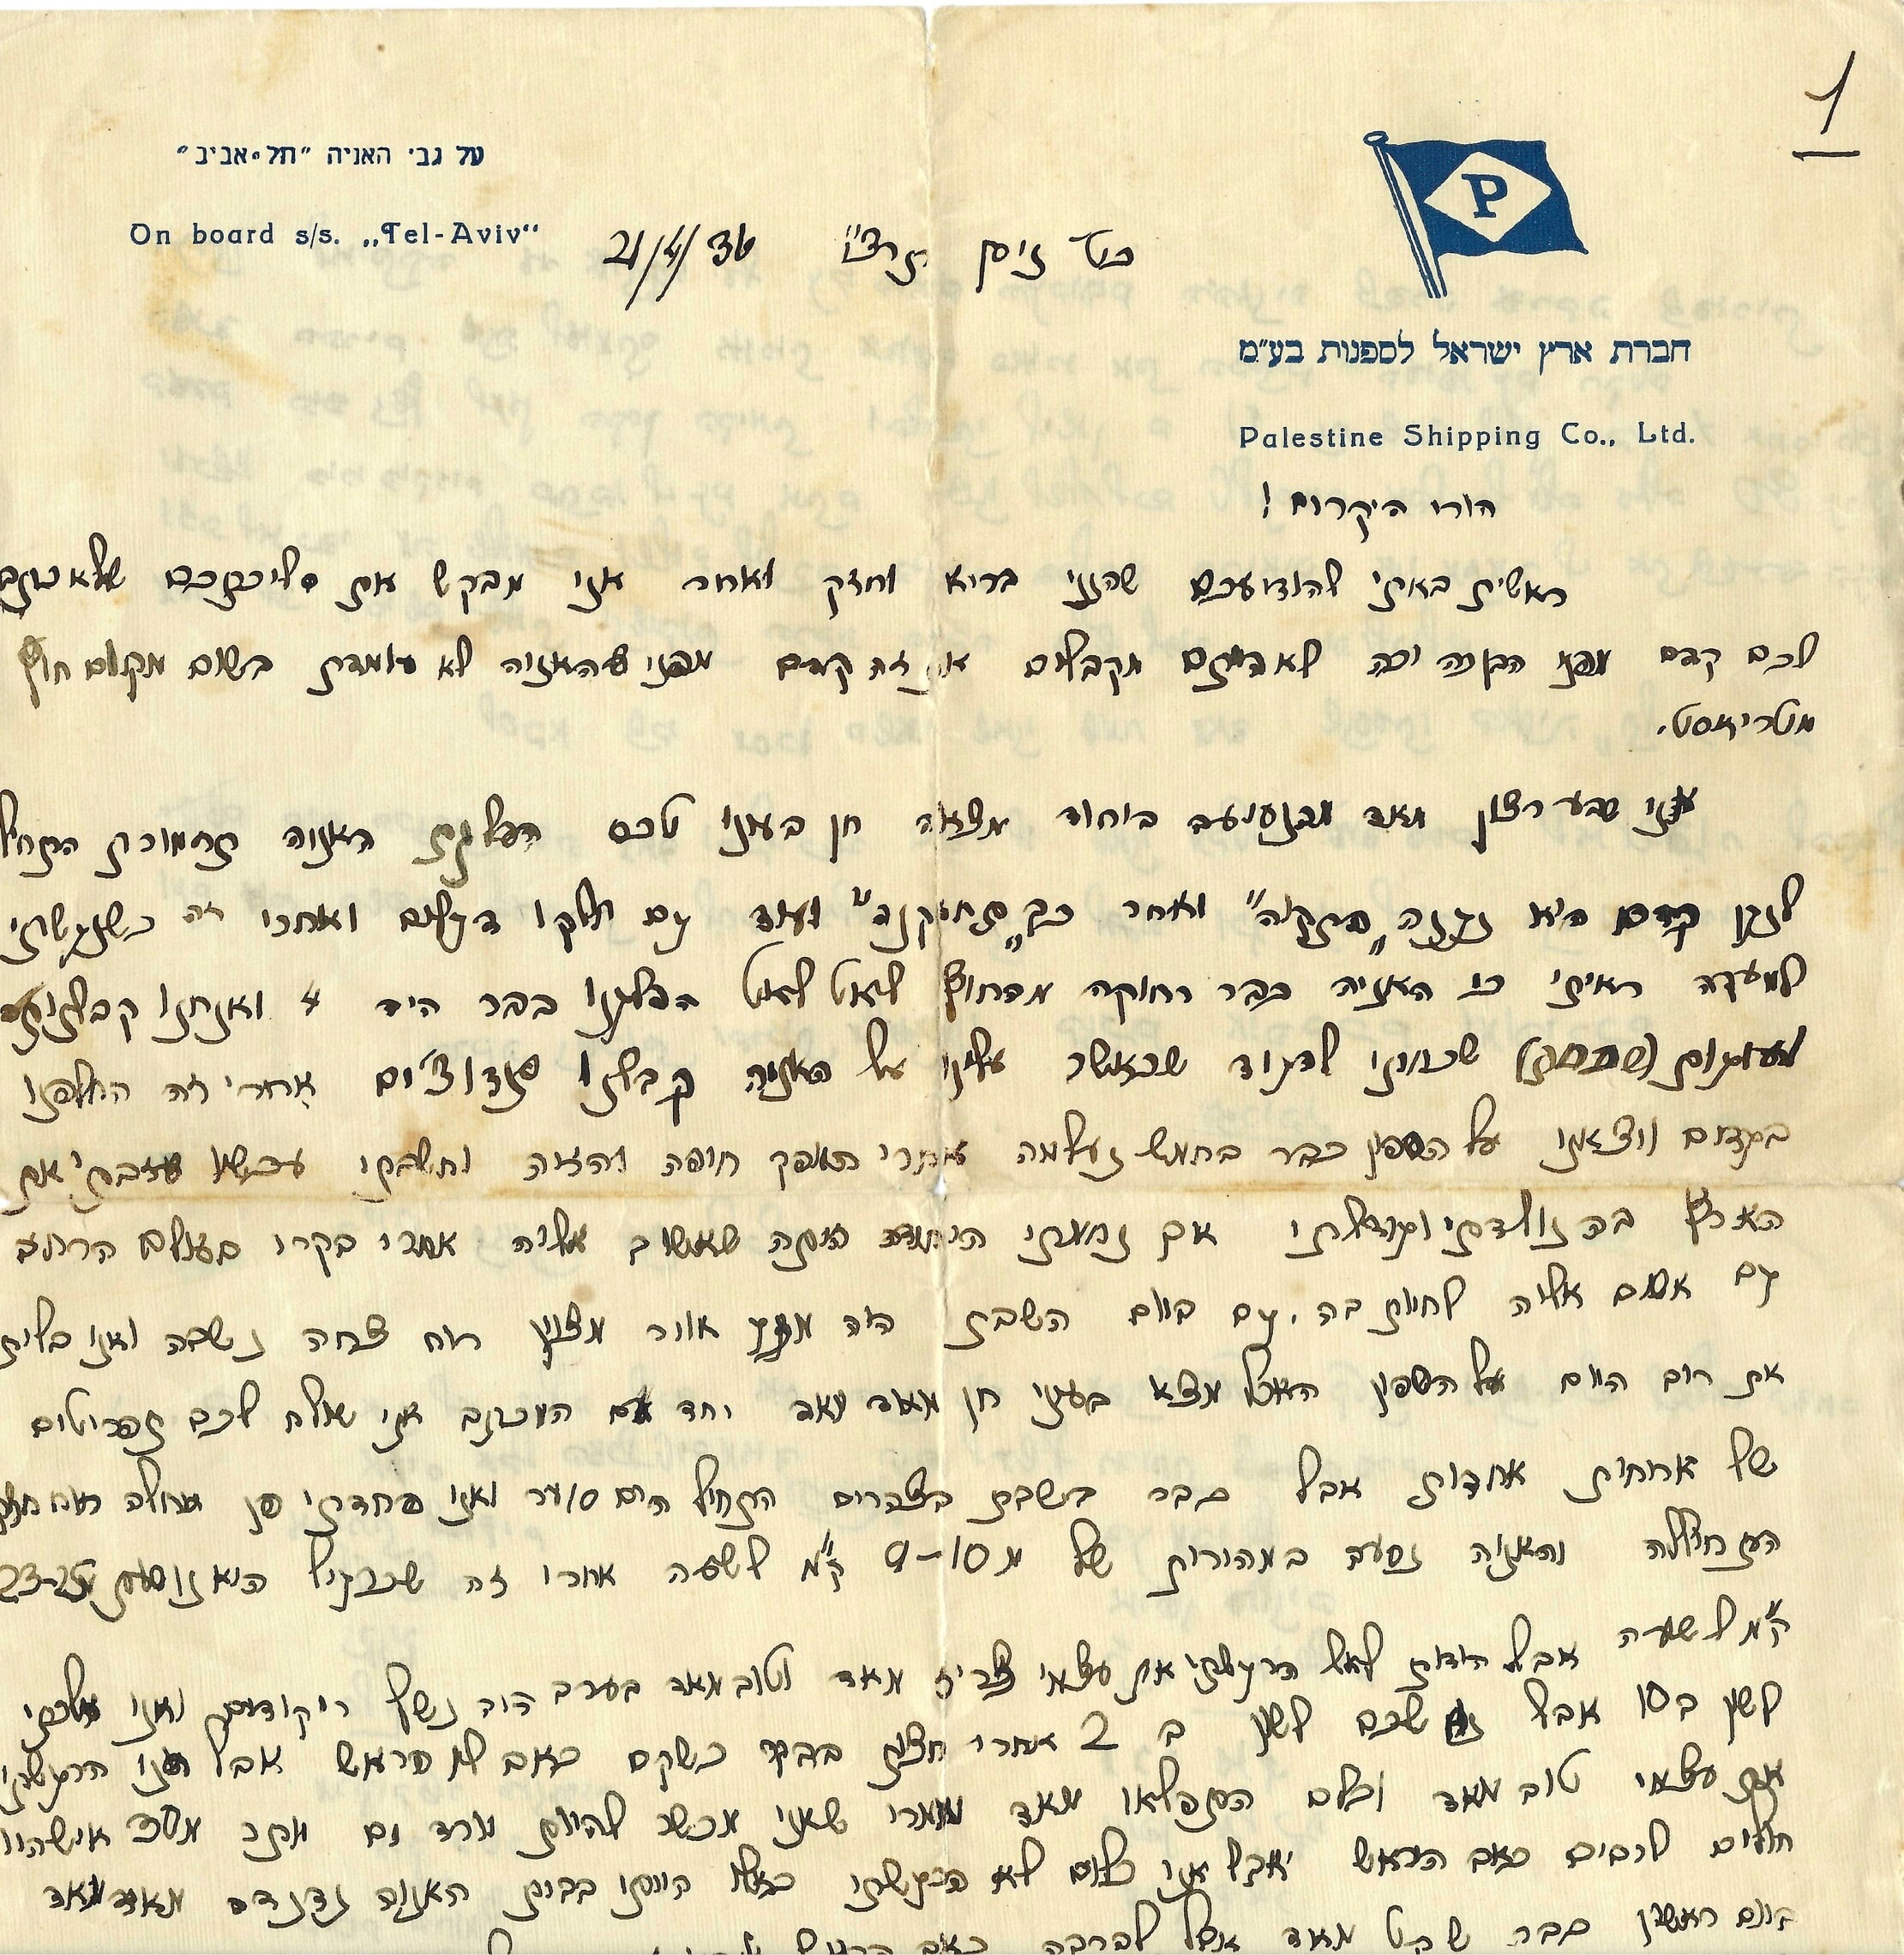 Excerpt from a letter that a 12-year-old father writes to his parents during the voyage from Haifa to Trieste, April 1936